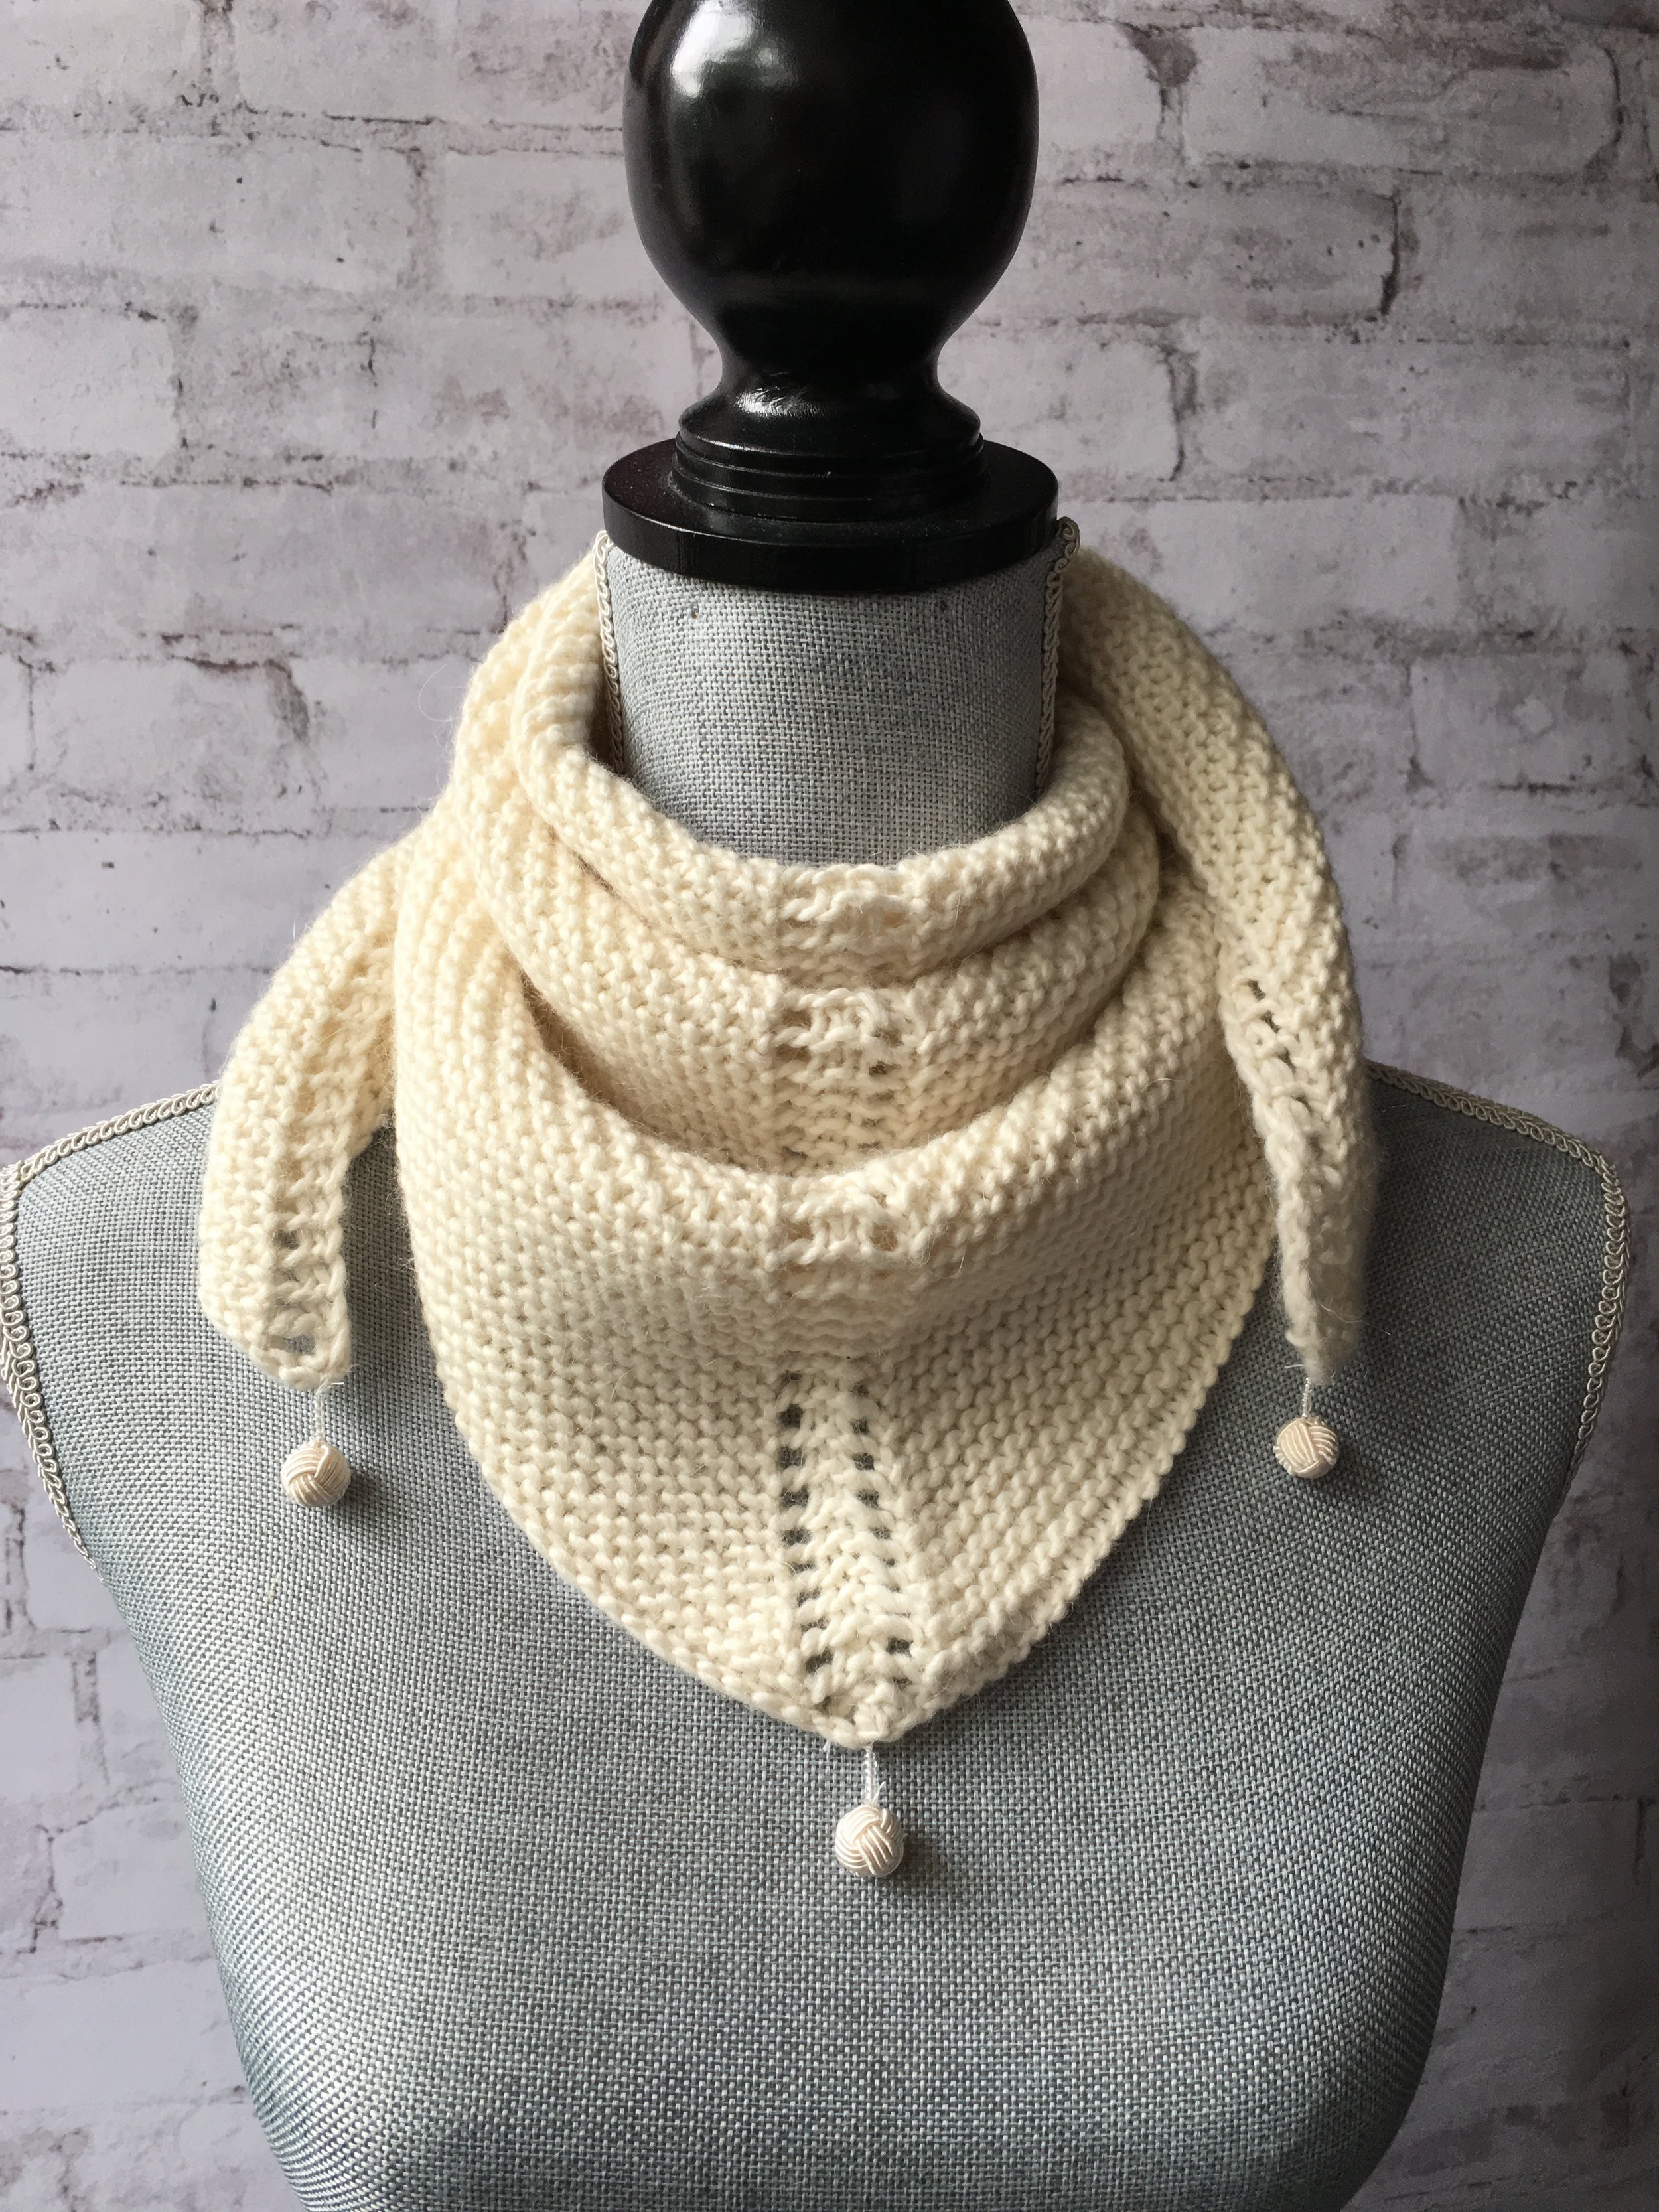 Dovetail Scarf (Worsted) Kit